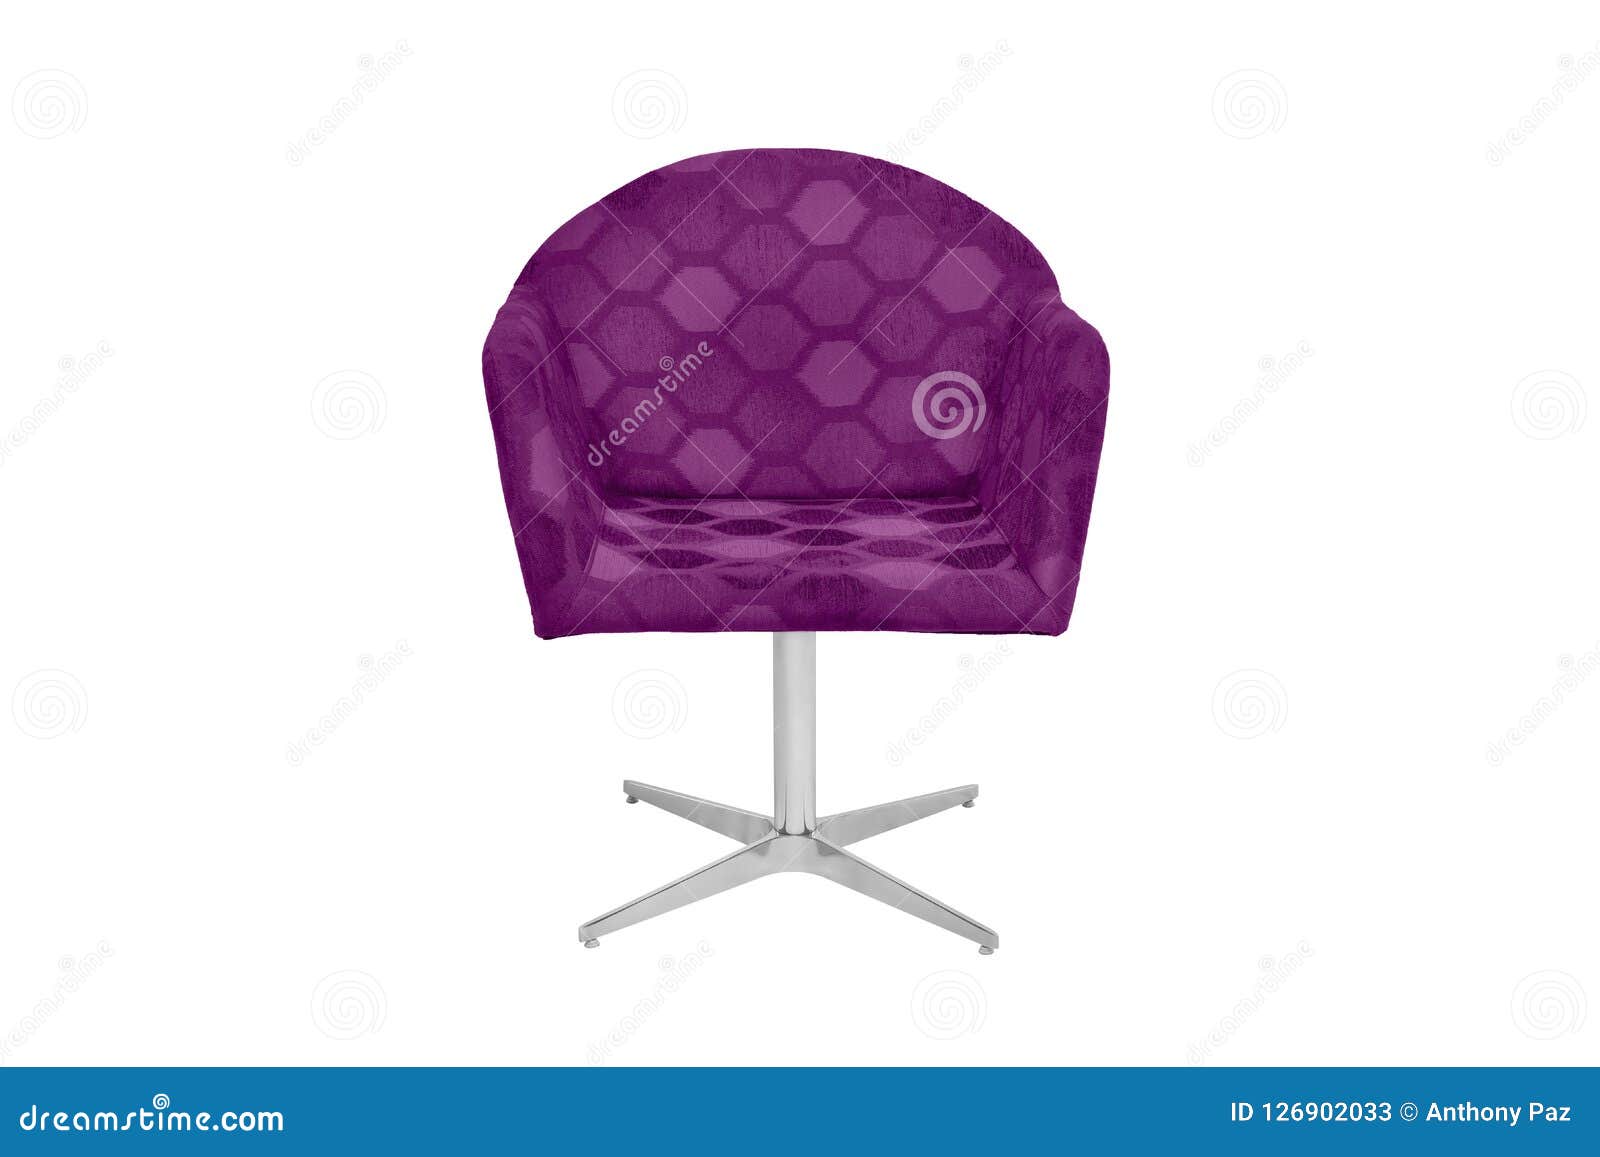 Blue and Grey Color Armchair Stock Image - Image of object, elegance ...